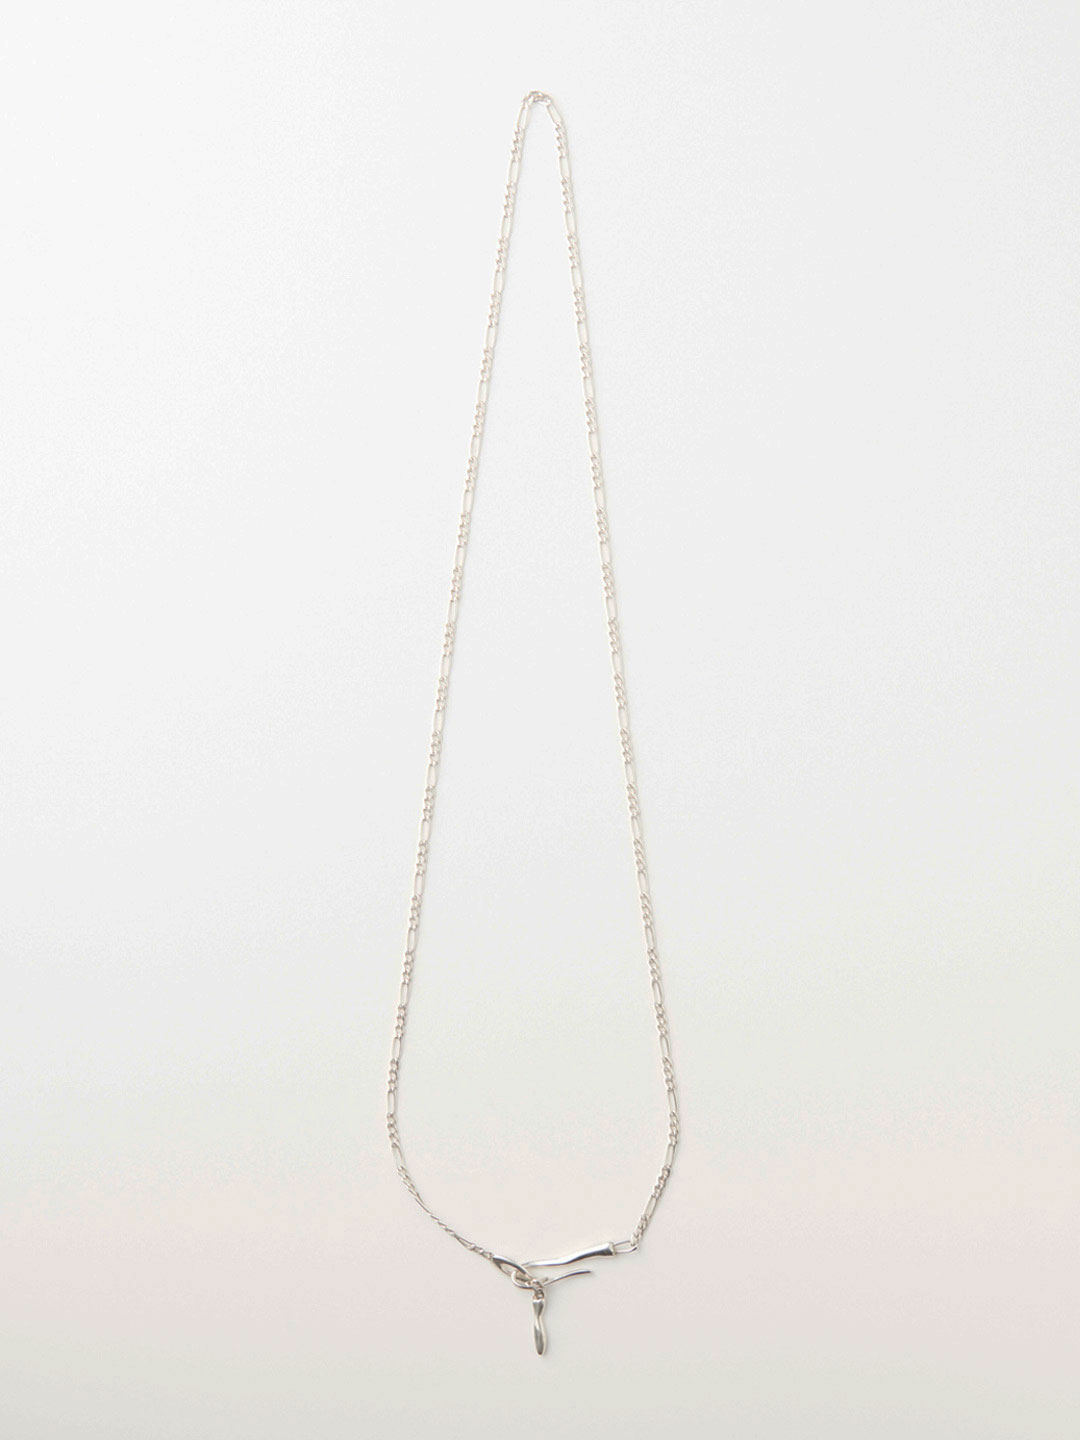 Figarito Necklace/Belly Chain - Silver